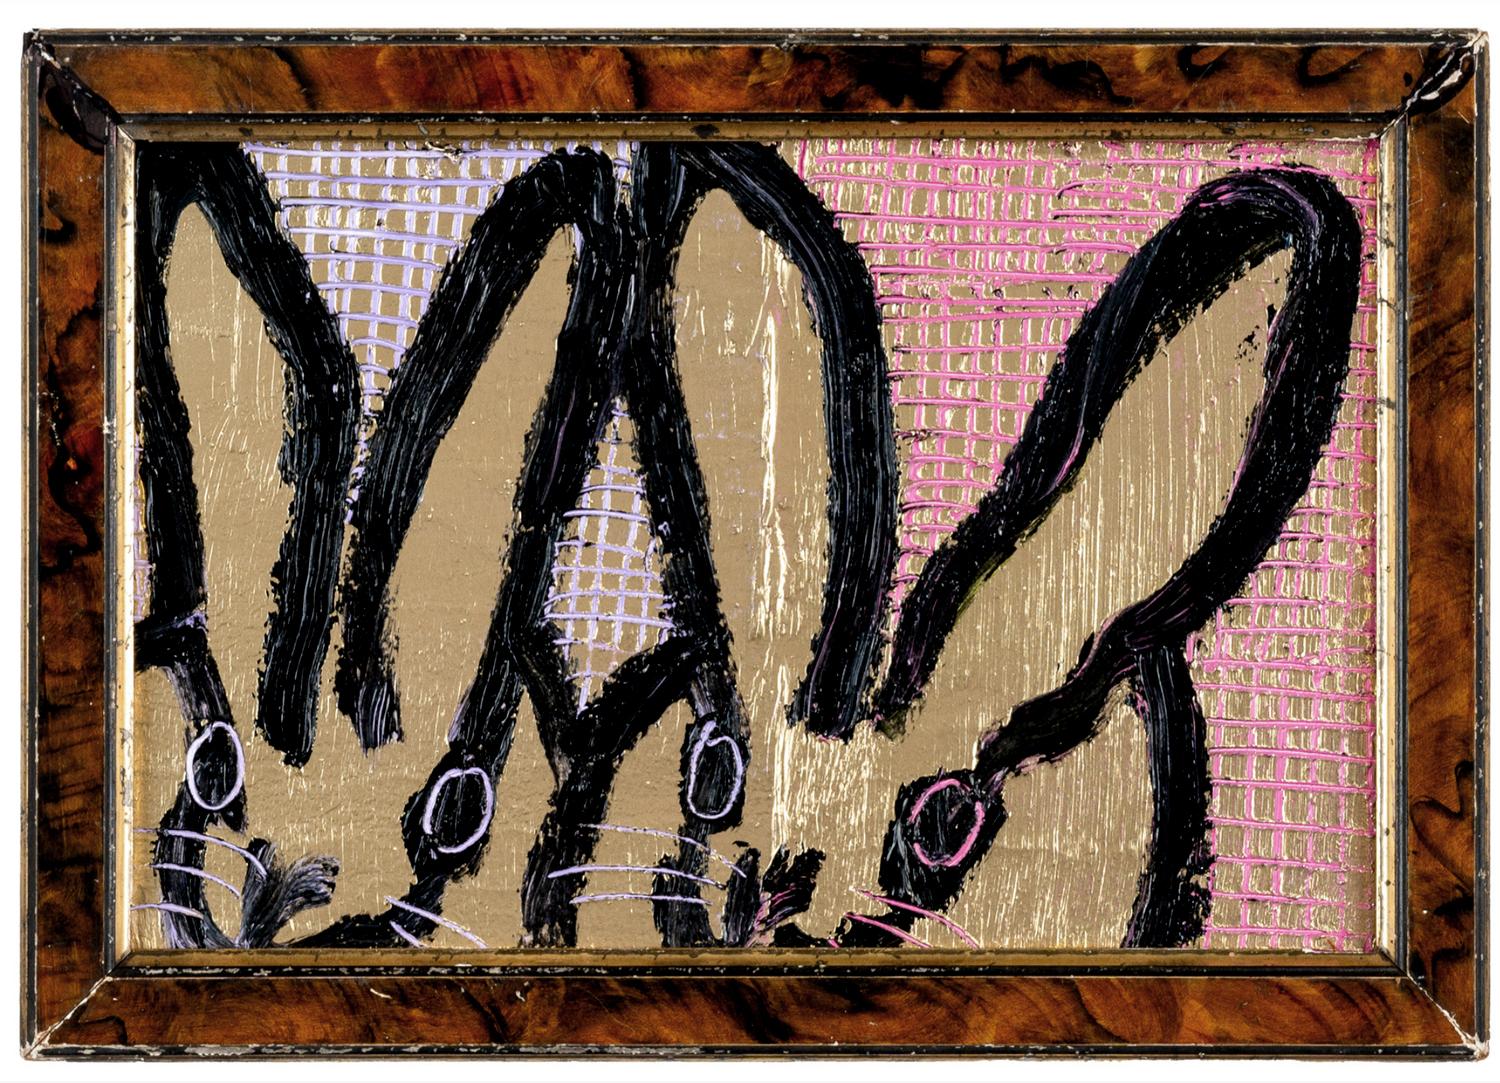 Renowned artist Hunt Slonem's "Double Score" is a 8x12 oil painting on wood featuring two black bunny outlines over a scored multi-colored pink and purple background, finished with the artist's choice of antique gold framing. Use of gold leafing